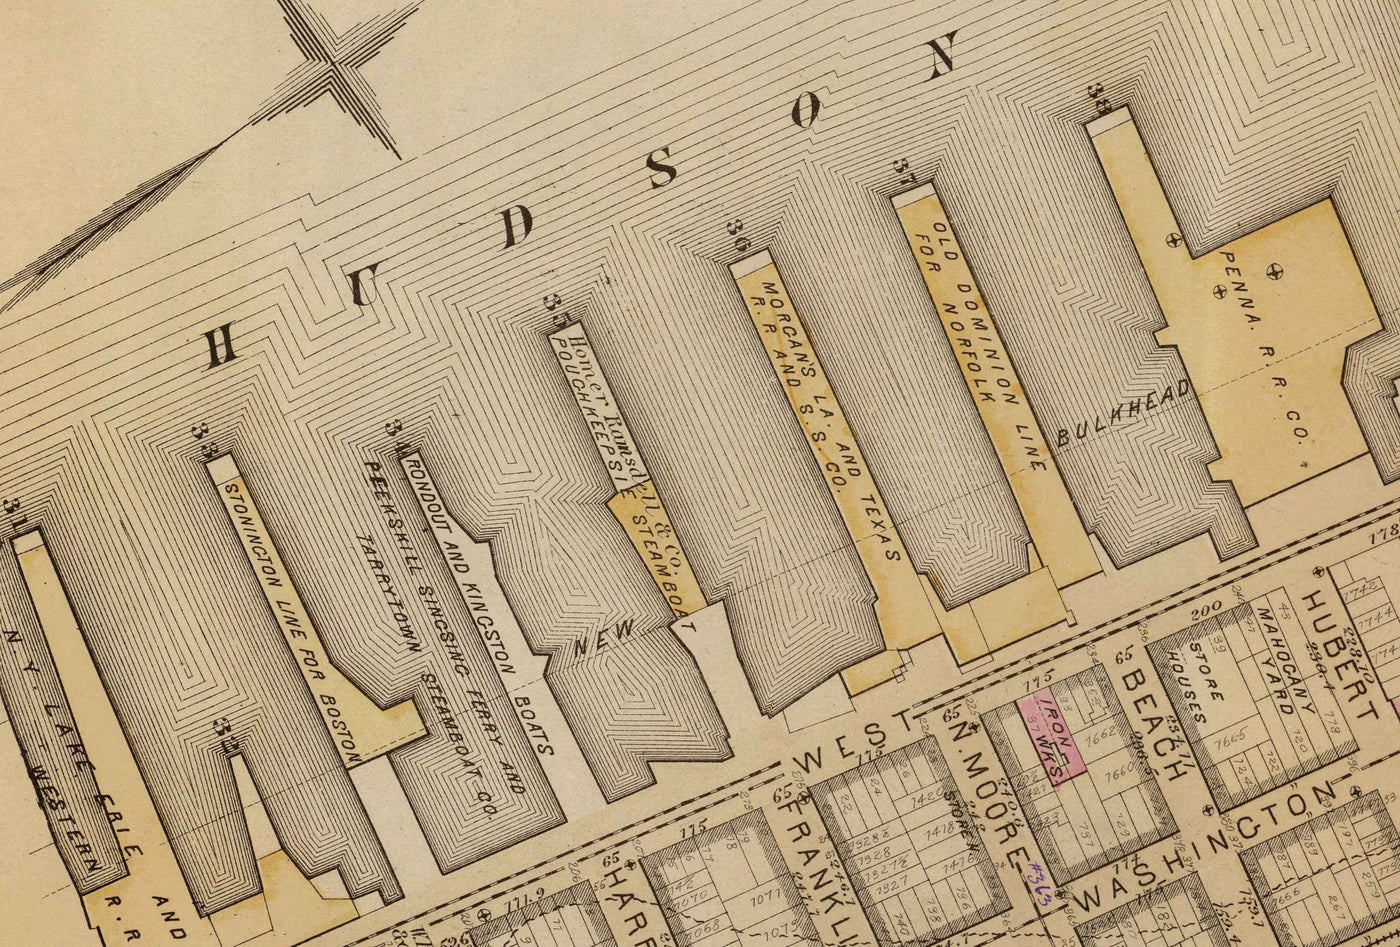 Old Map of Hudson Square & Tribeca, 1879 - Lower Manhattan Wards NYC, Houston St, Holland Tunnel, Canal St, Varick St, Hudson St